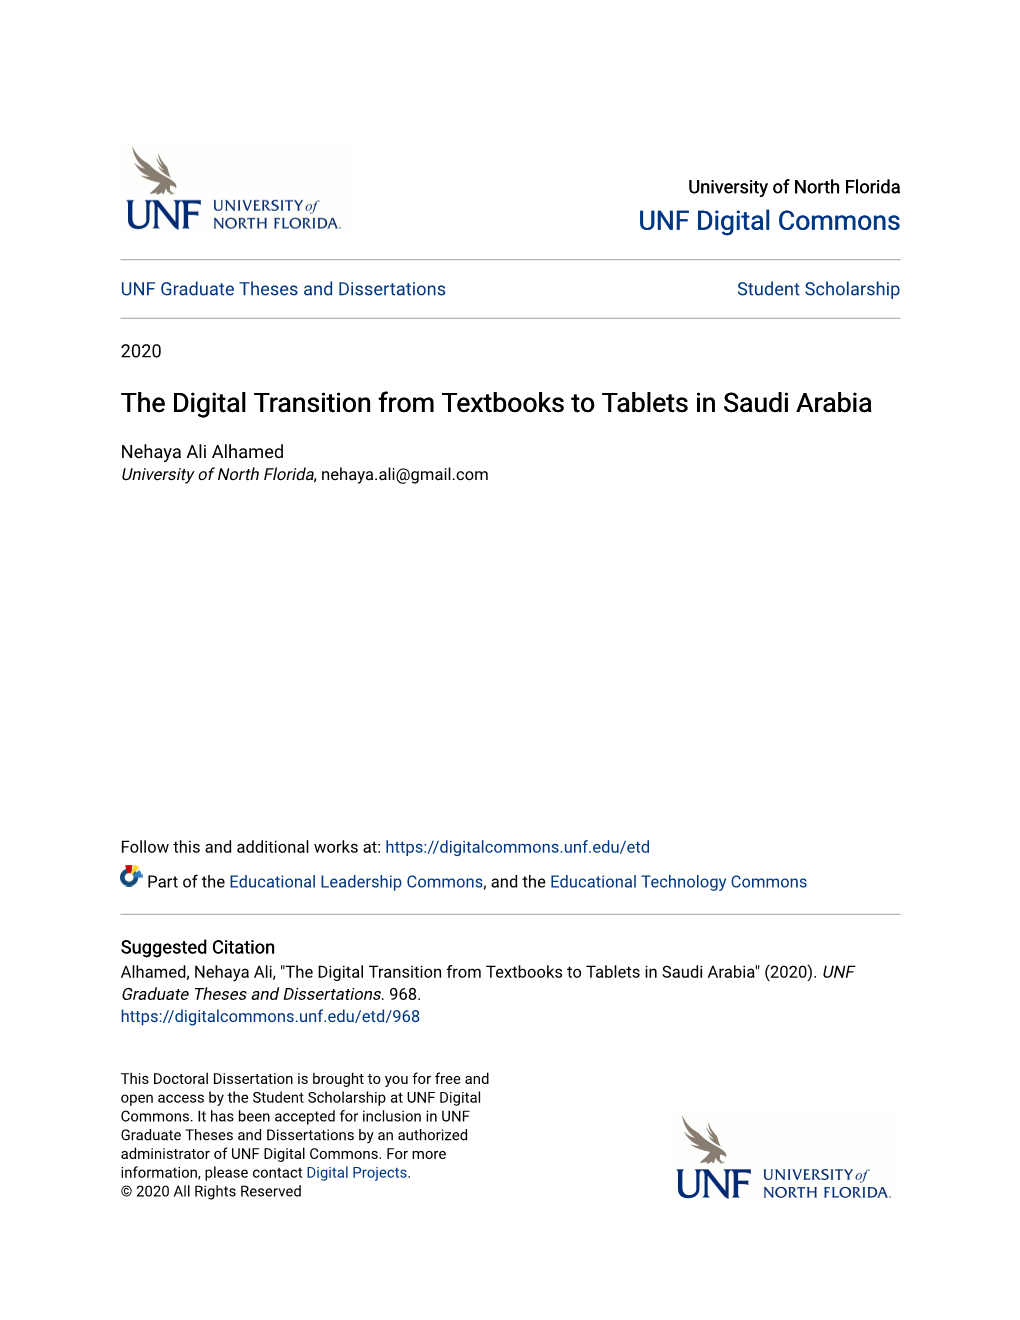 The Digital Transition from Textbooks to Tablets in Saudi Arabia